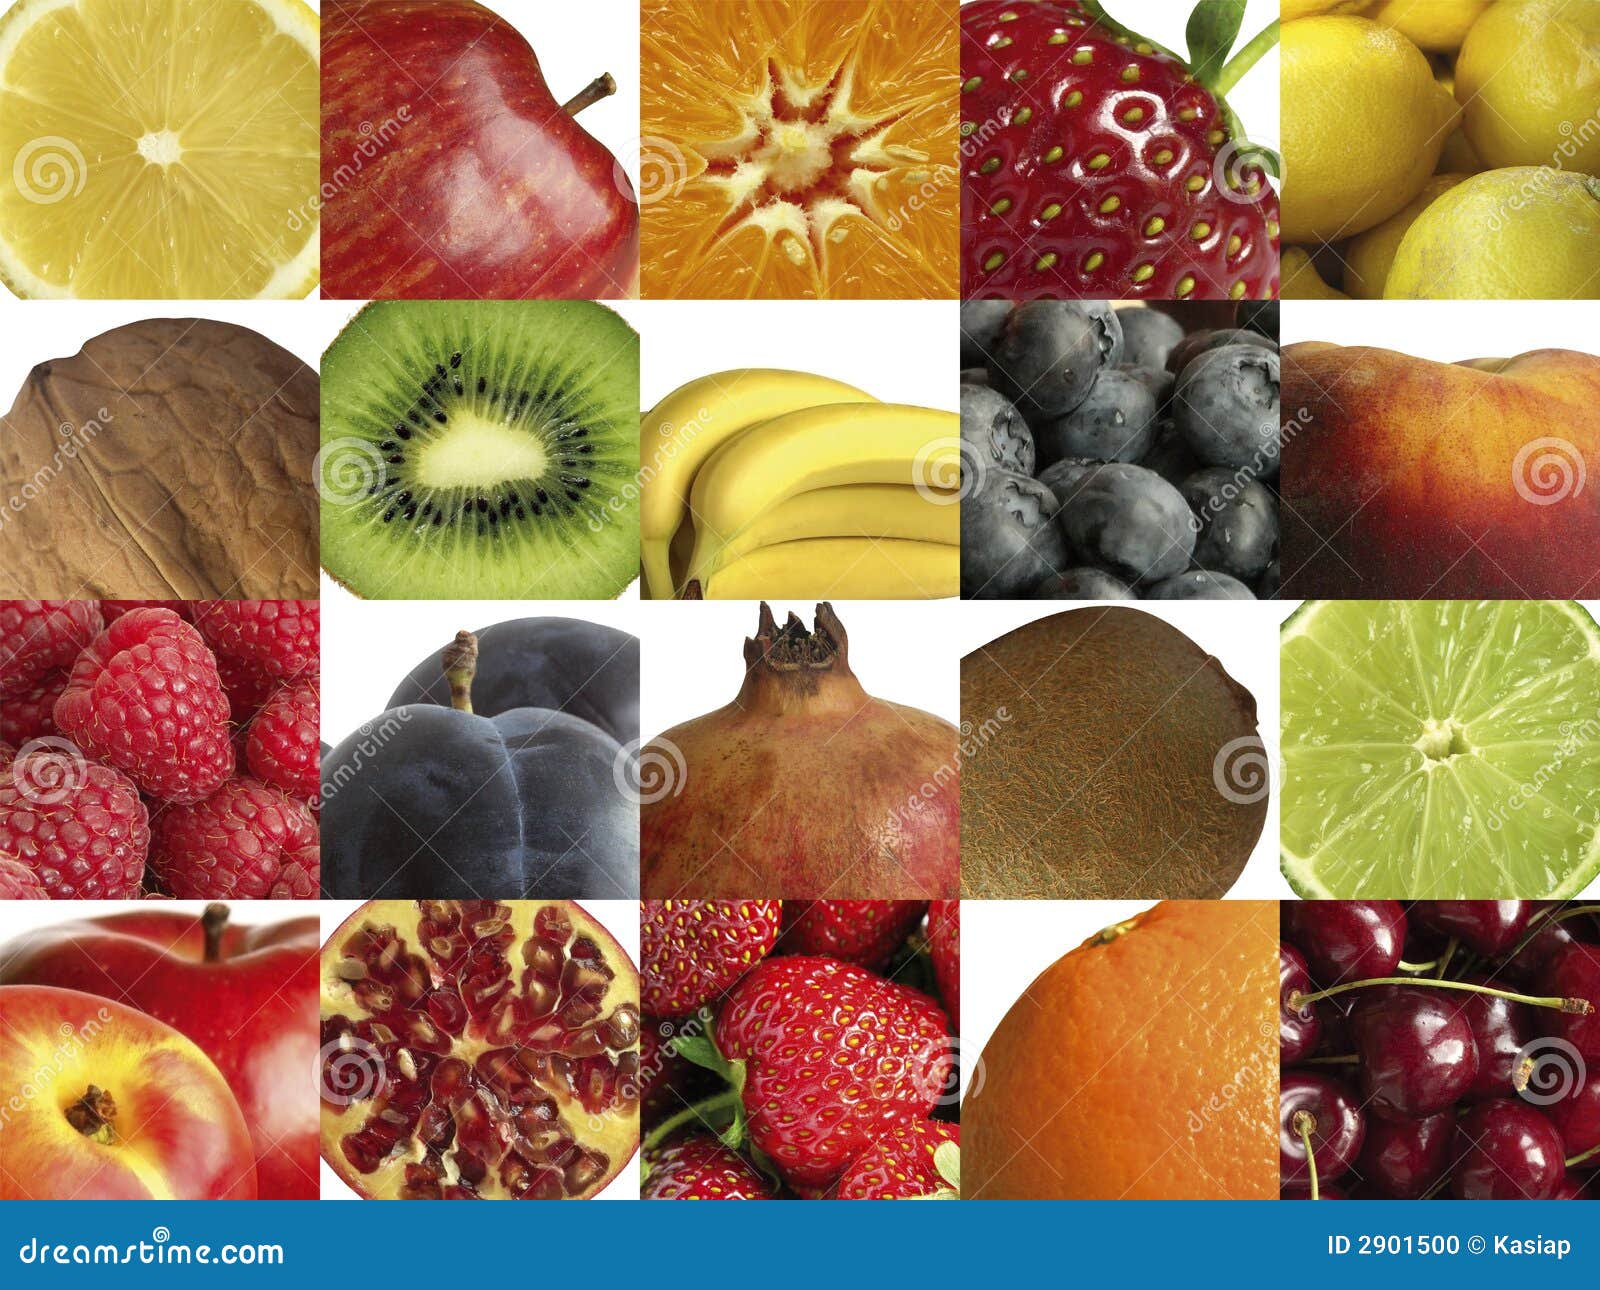 clipart of different fruits - photo #42